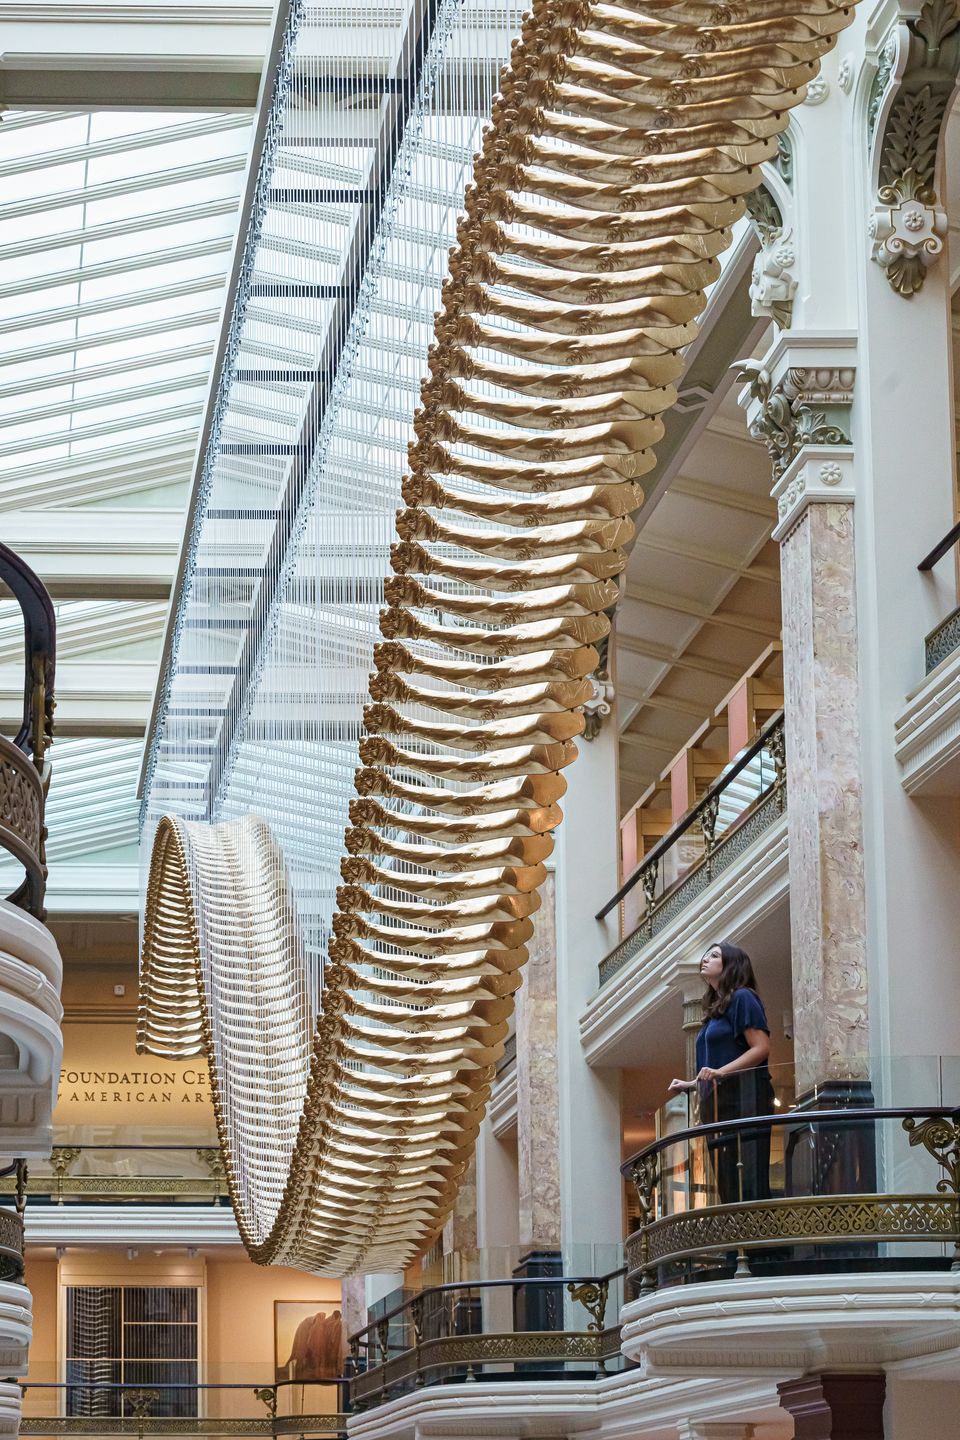 A person standing on a balcony in a historic museum looks at an undulating artwork made up of 200 golden-cast arms hanging from the ceiling.